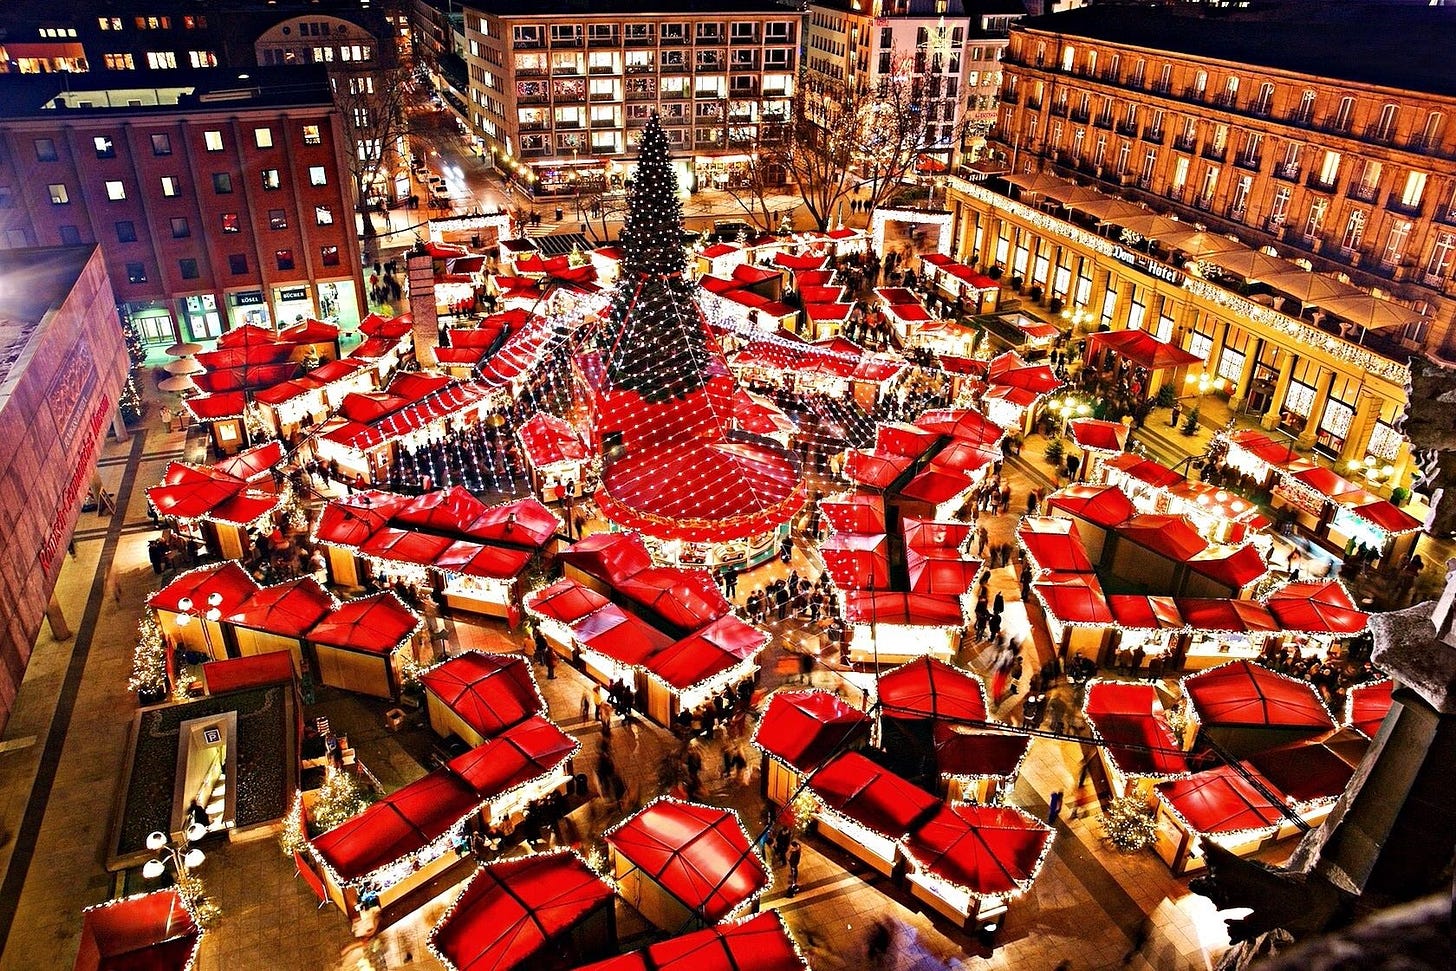 25 Best Christmas Markets in Europe 2022 - European Holiday Destinations